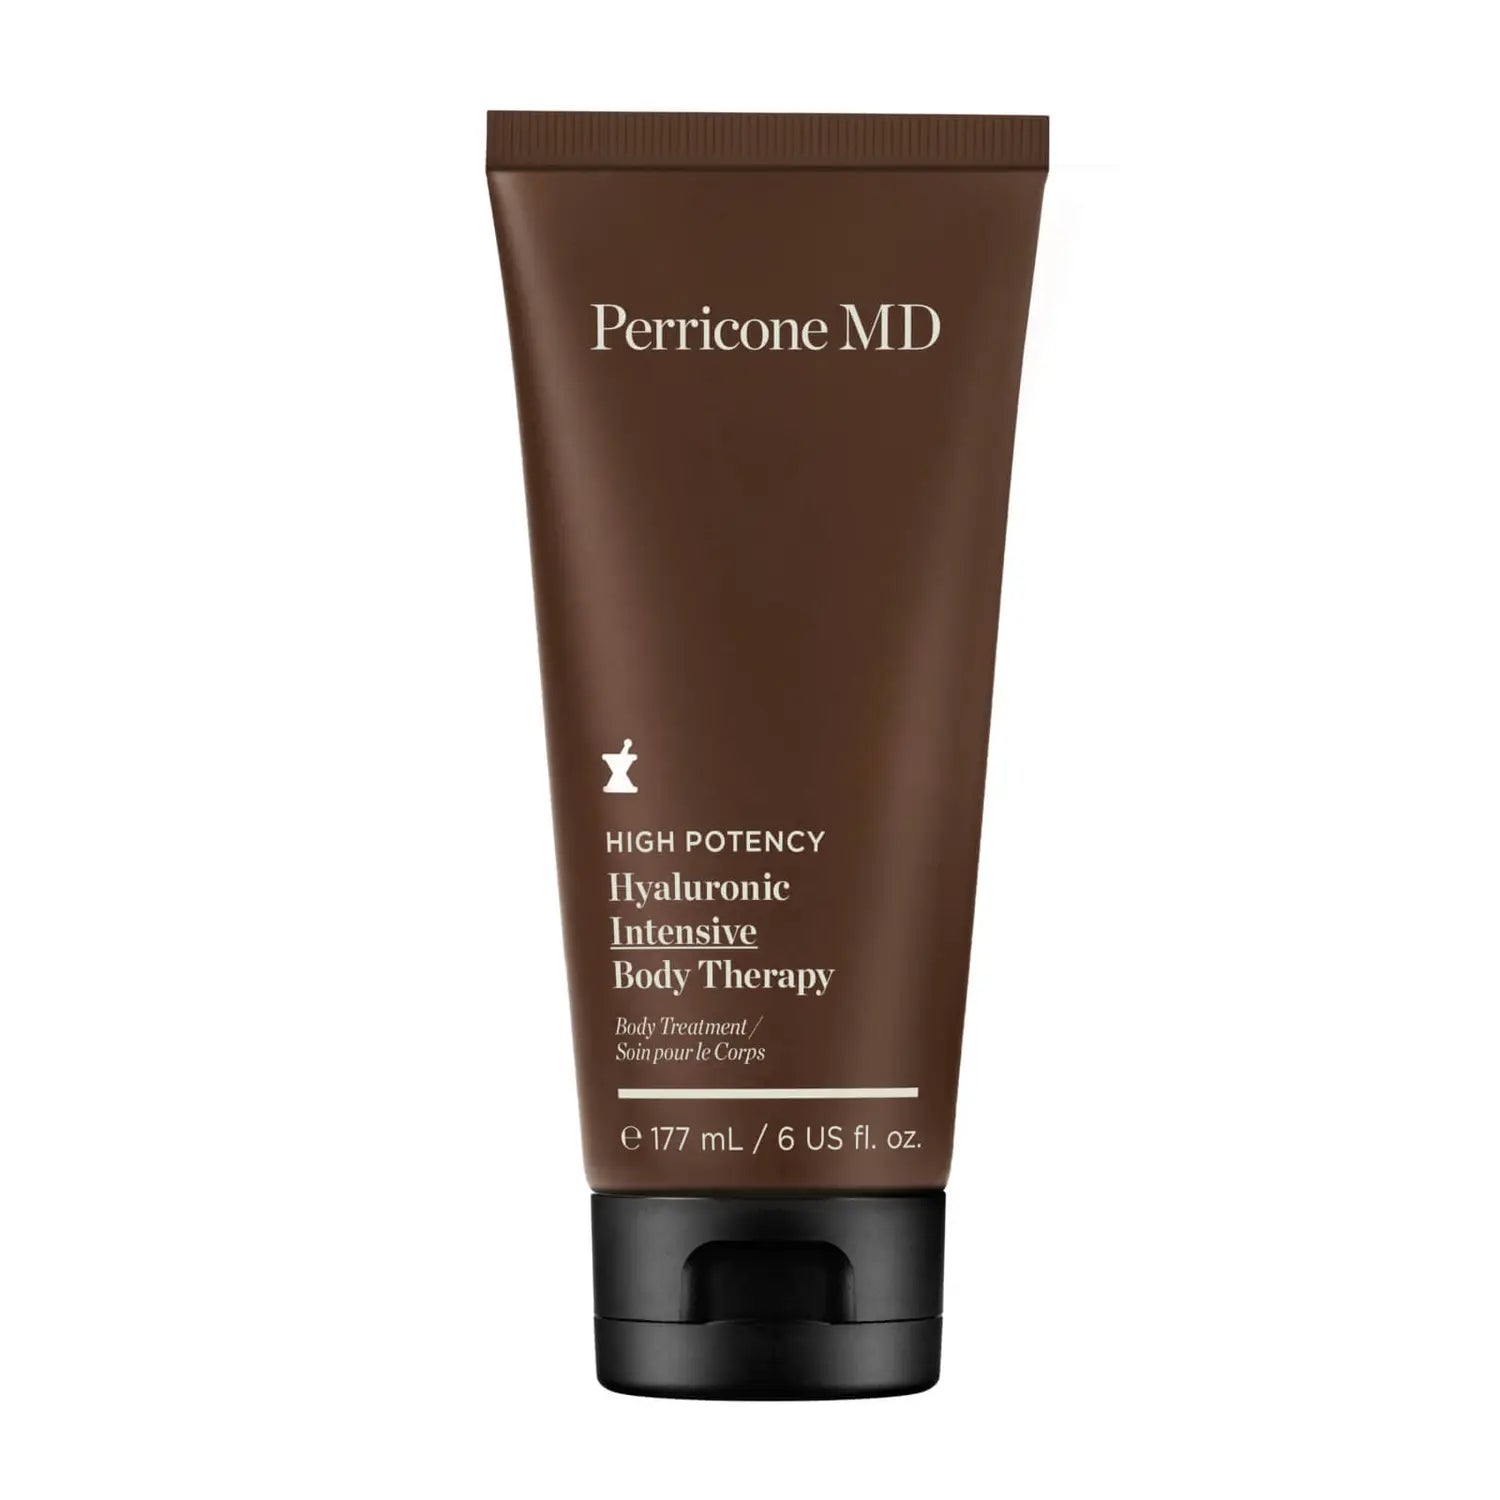 Perricone MD High Potency Hyaluronic Intensive Body Therapy